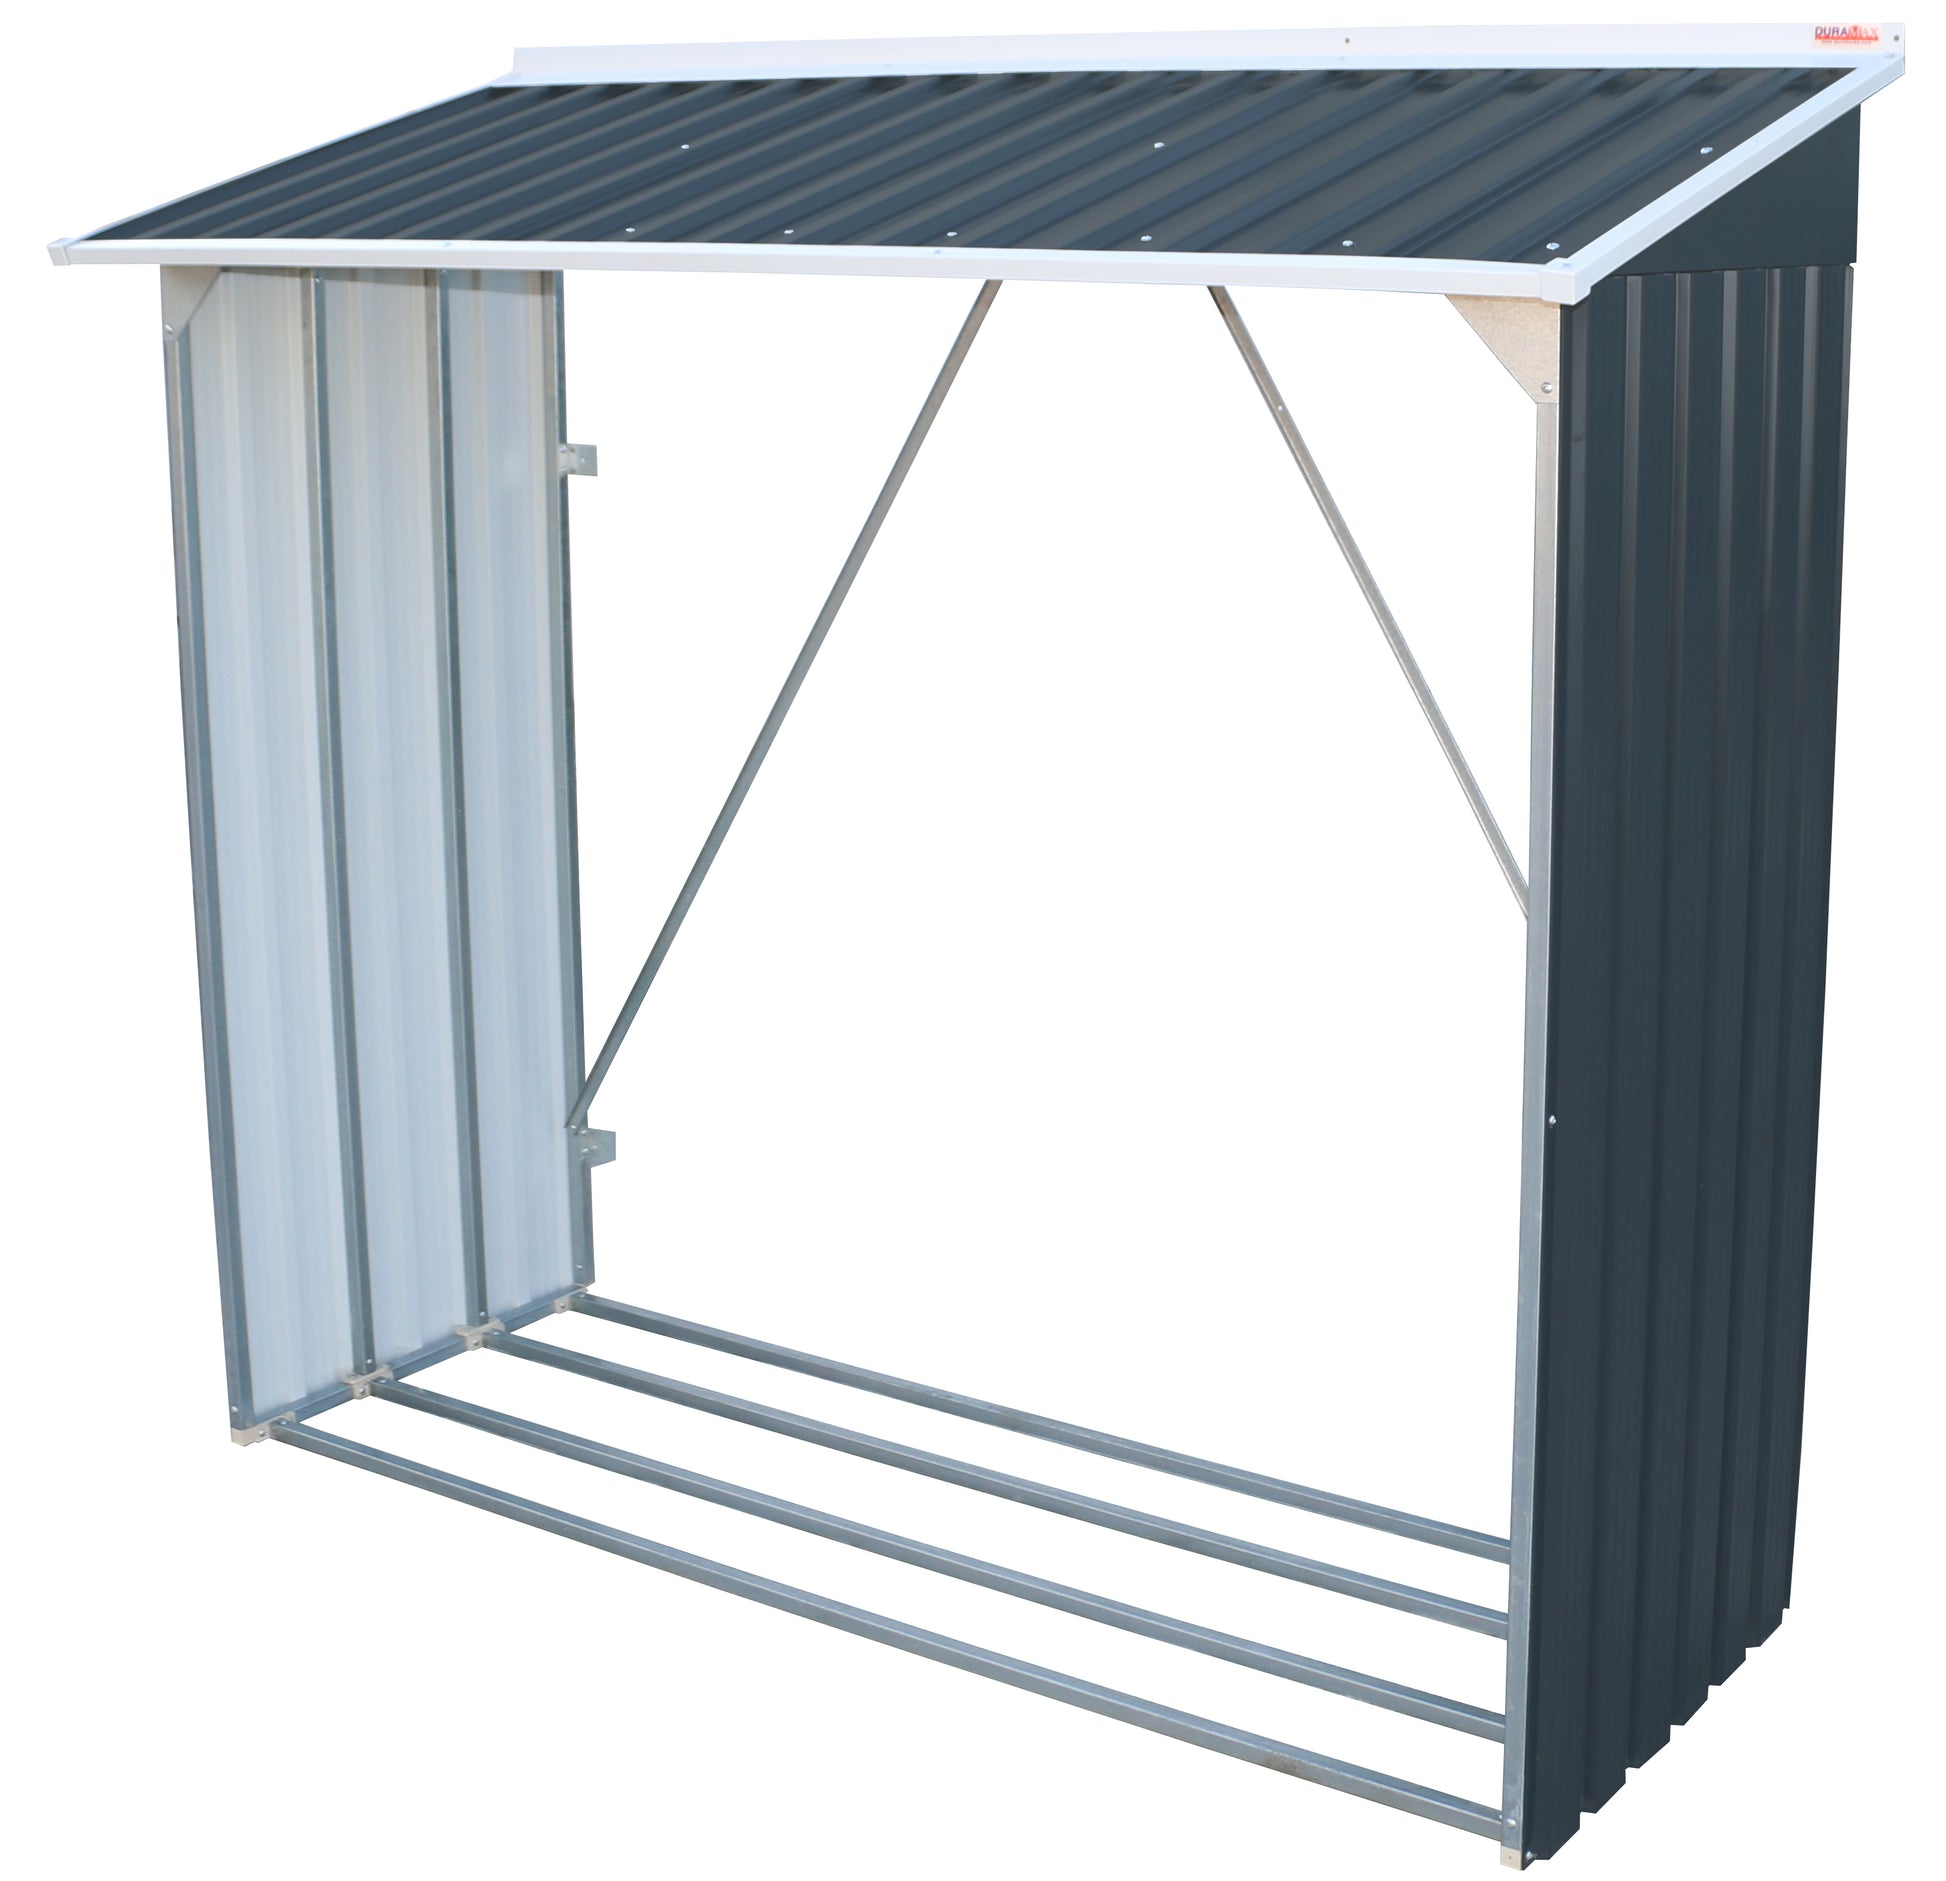 Woodstore to keep firewood dry and protected, woodstore made of steel and strong metal to support its structure. 